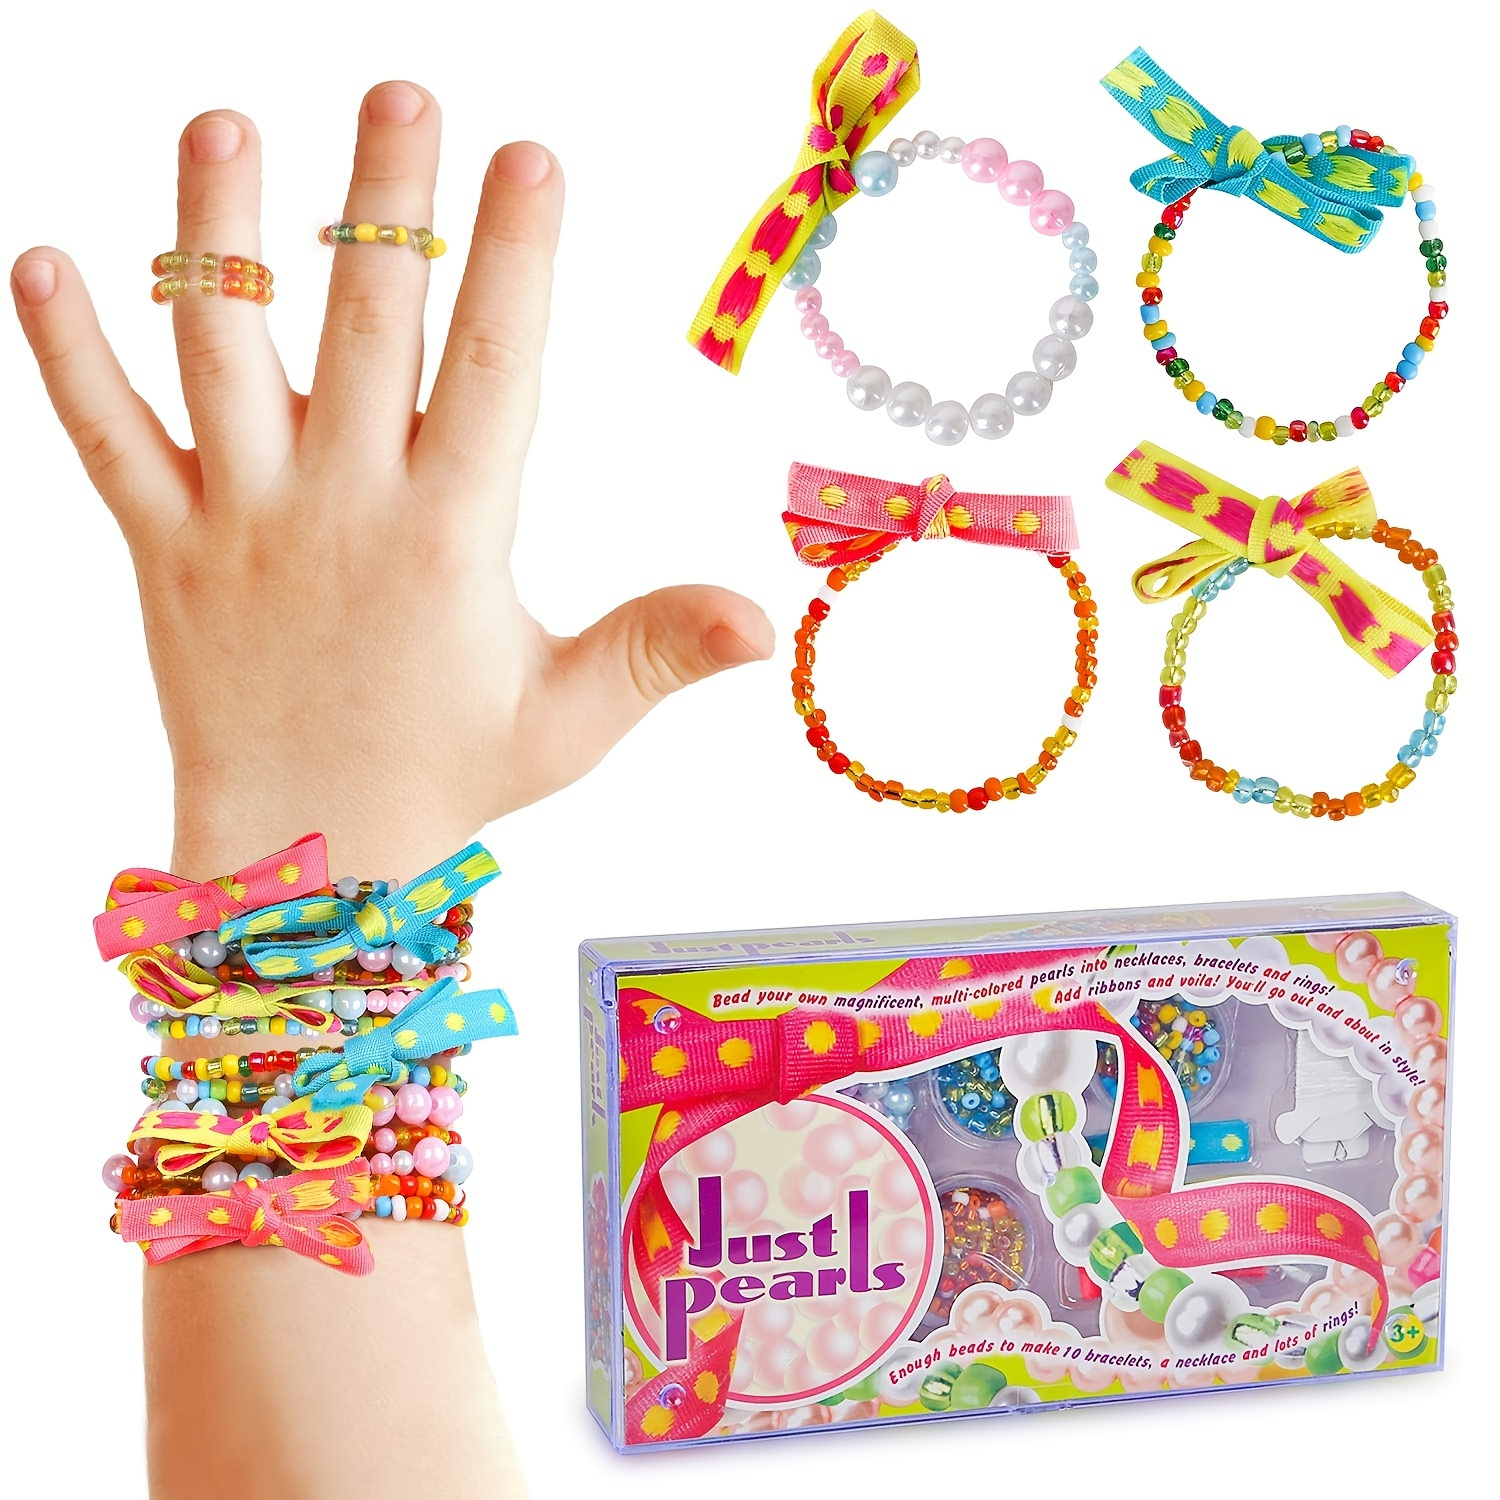 Unlock Your Creativity: DIY Bracelet & Necklace Making Craft Kits for Women  - Jewelry Making Supplies & Charms Included!